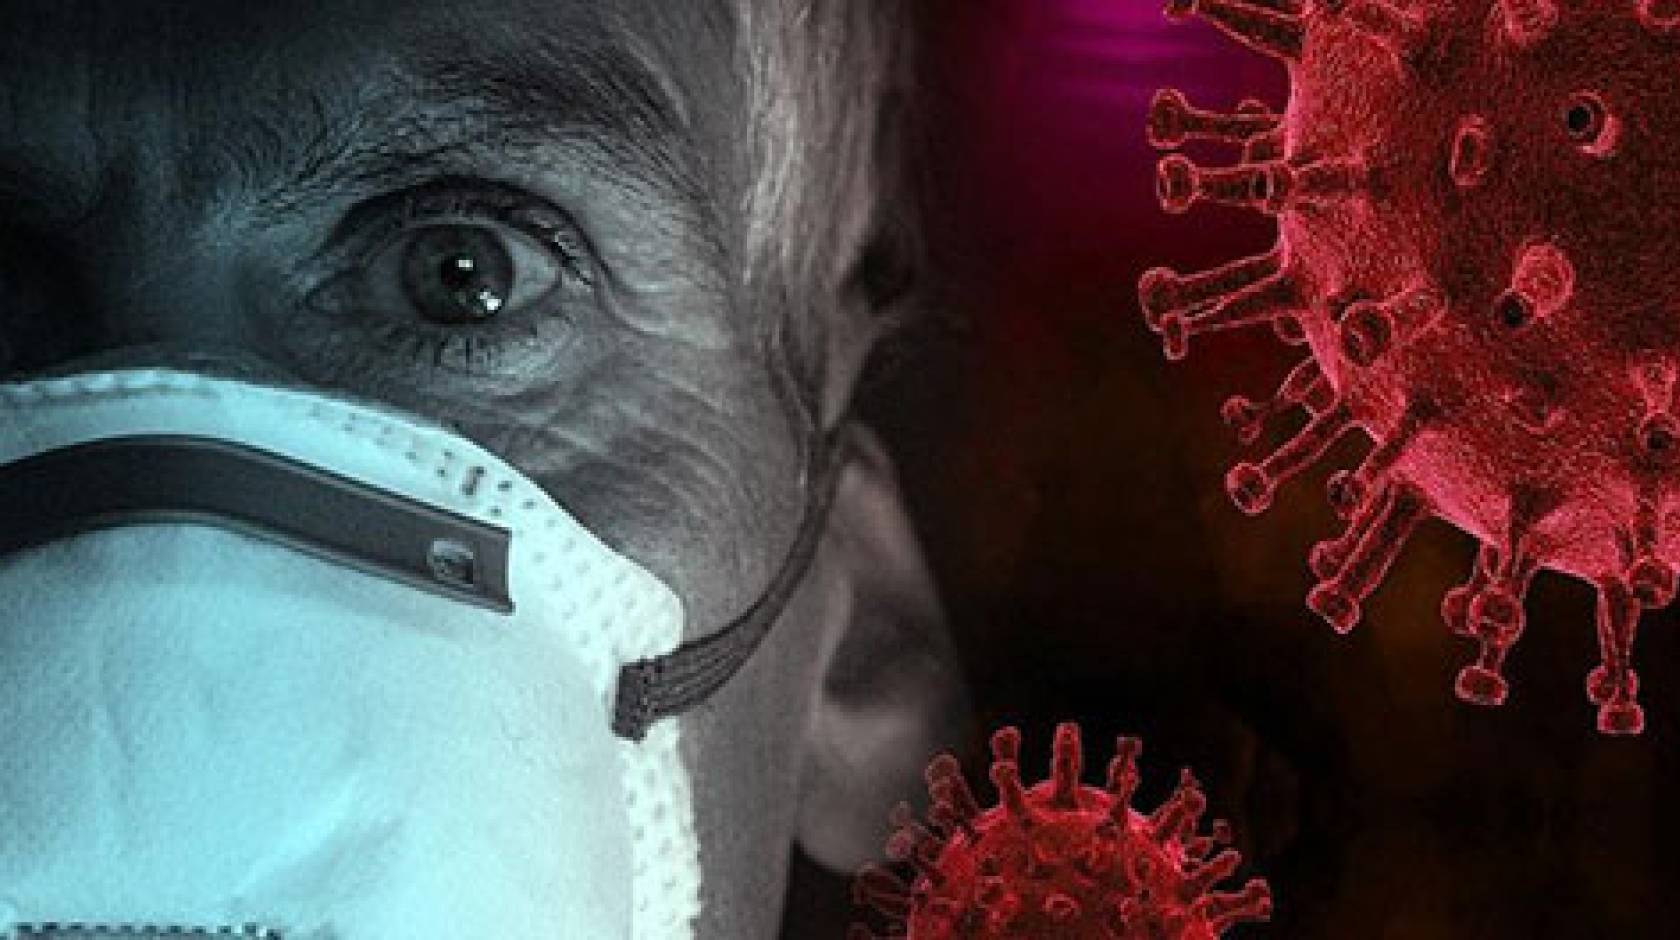 Man with mask with a coronavirus illustrated next to him